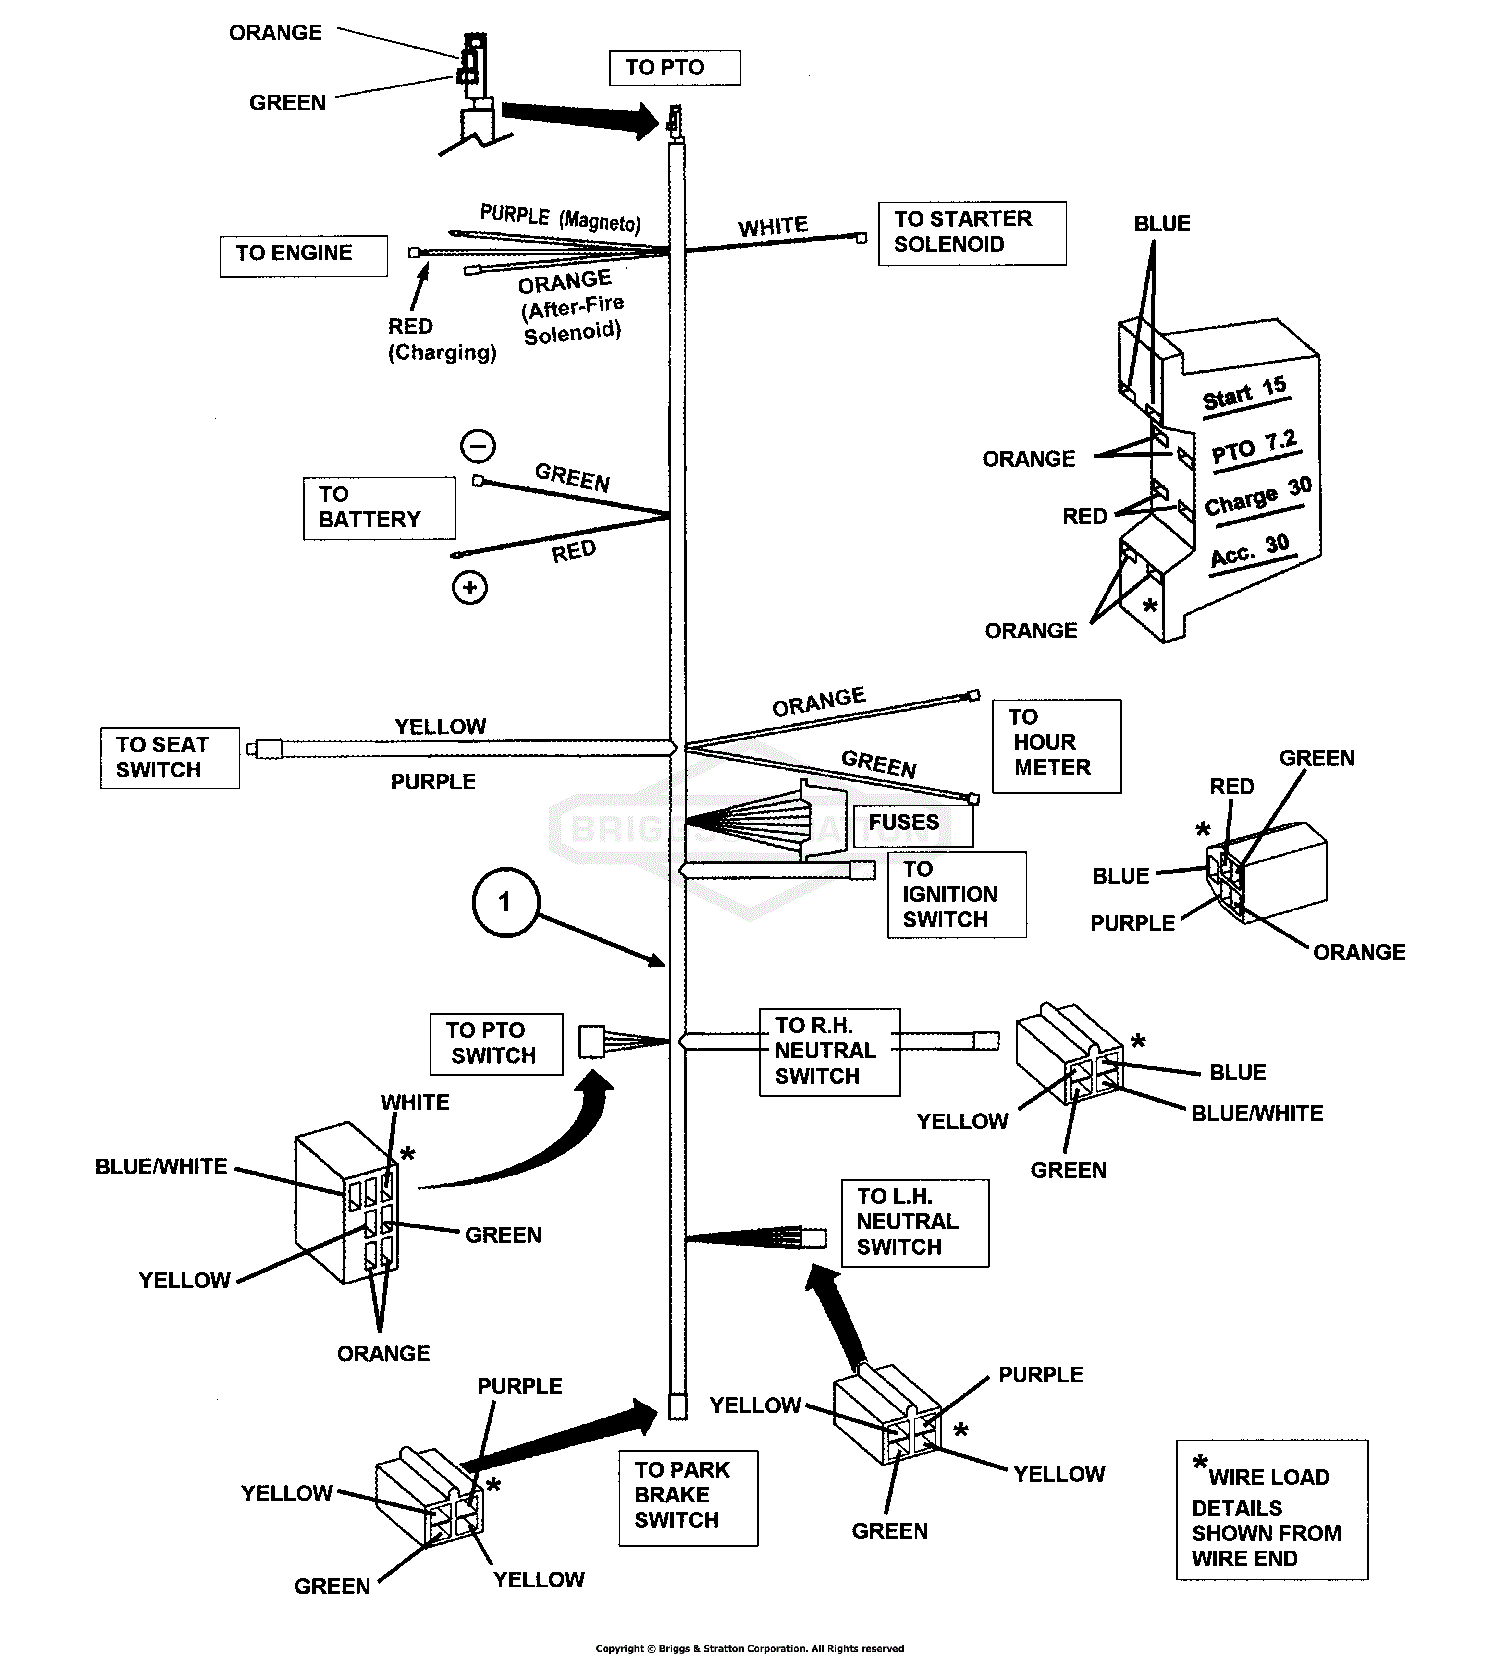 Briggs And Stratton Wiring Diagram 21 Hp from az417944.vo.msecnd.net